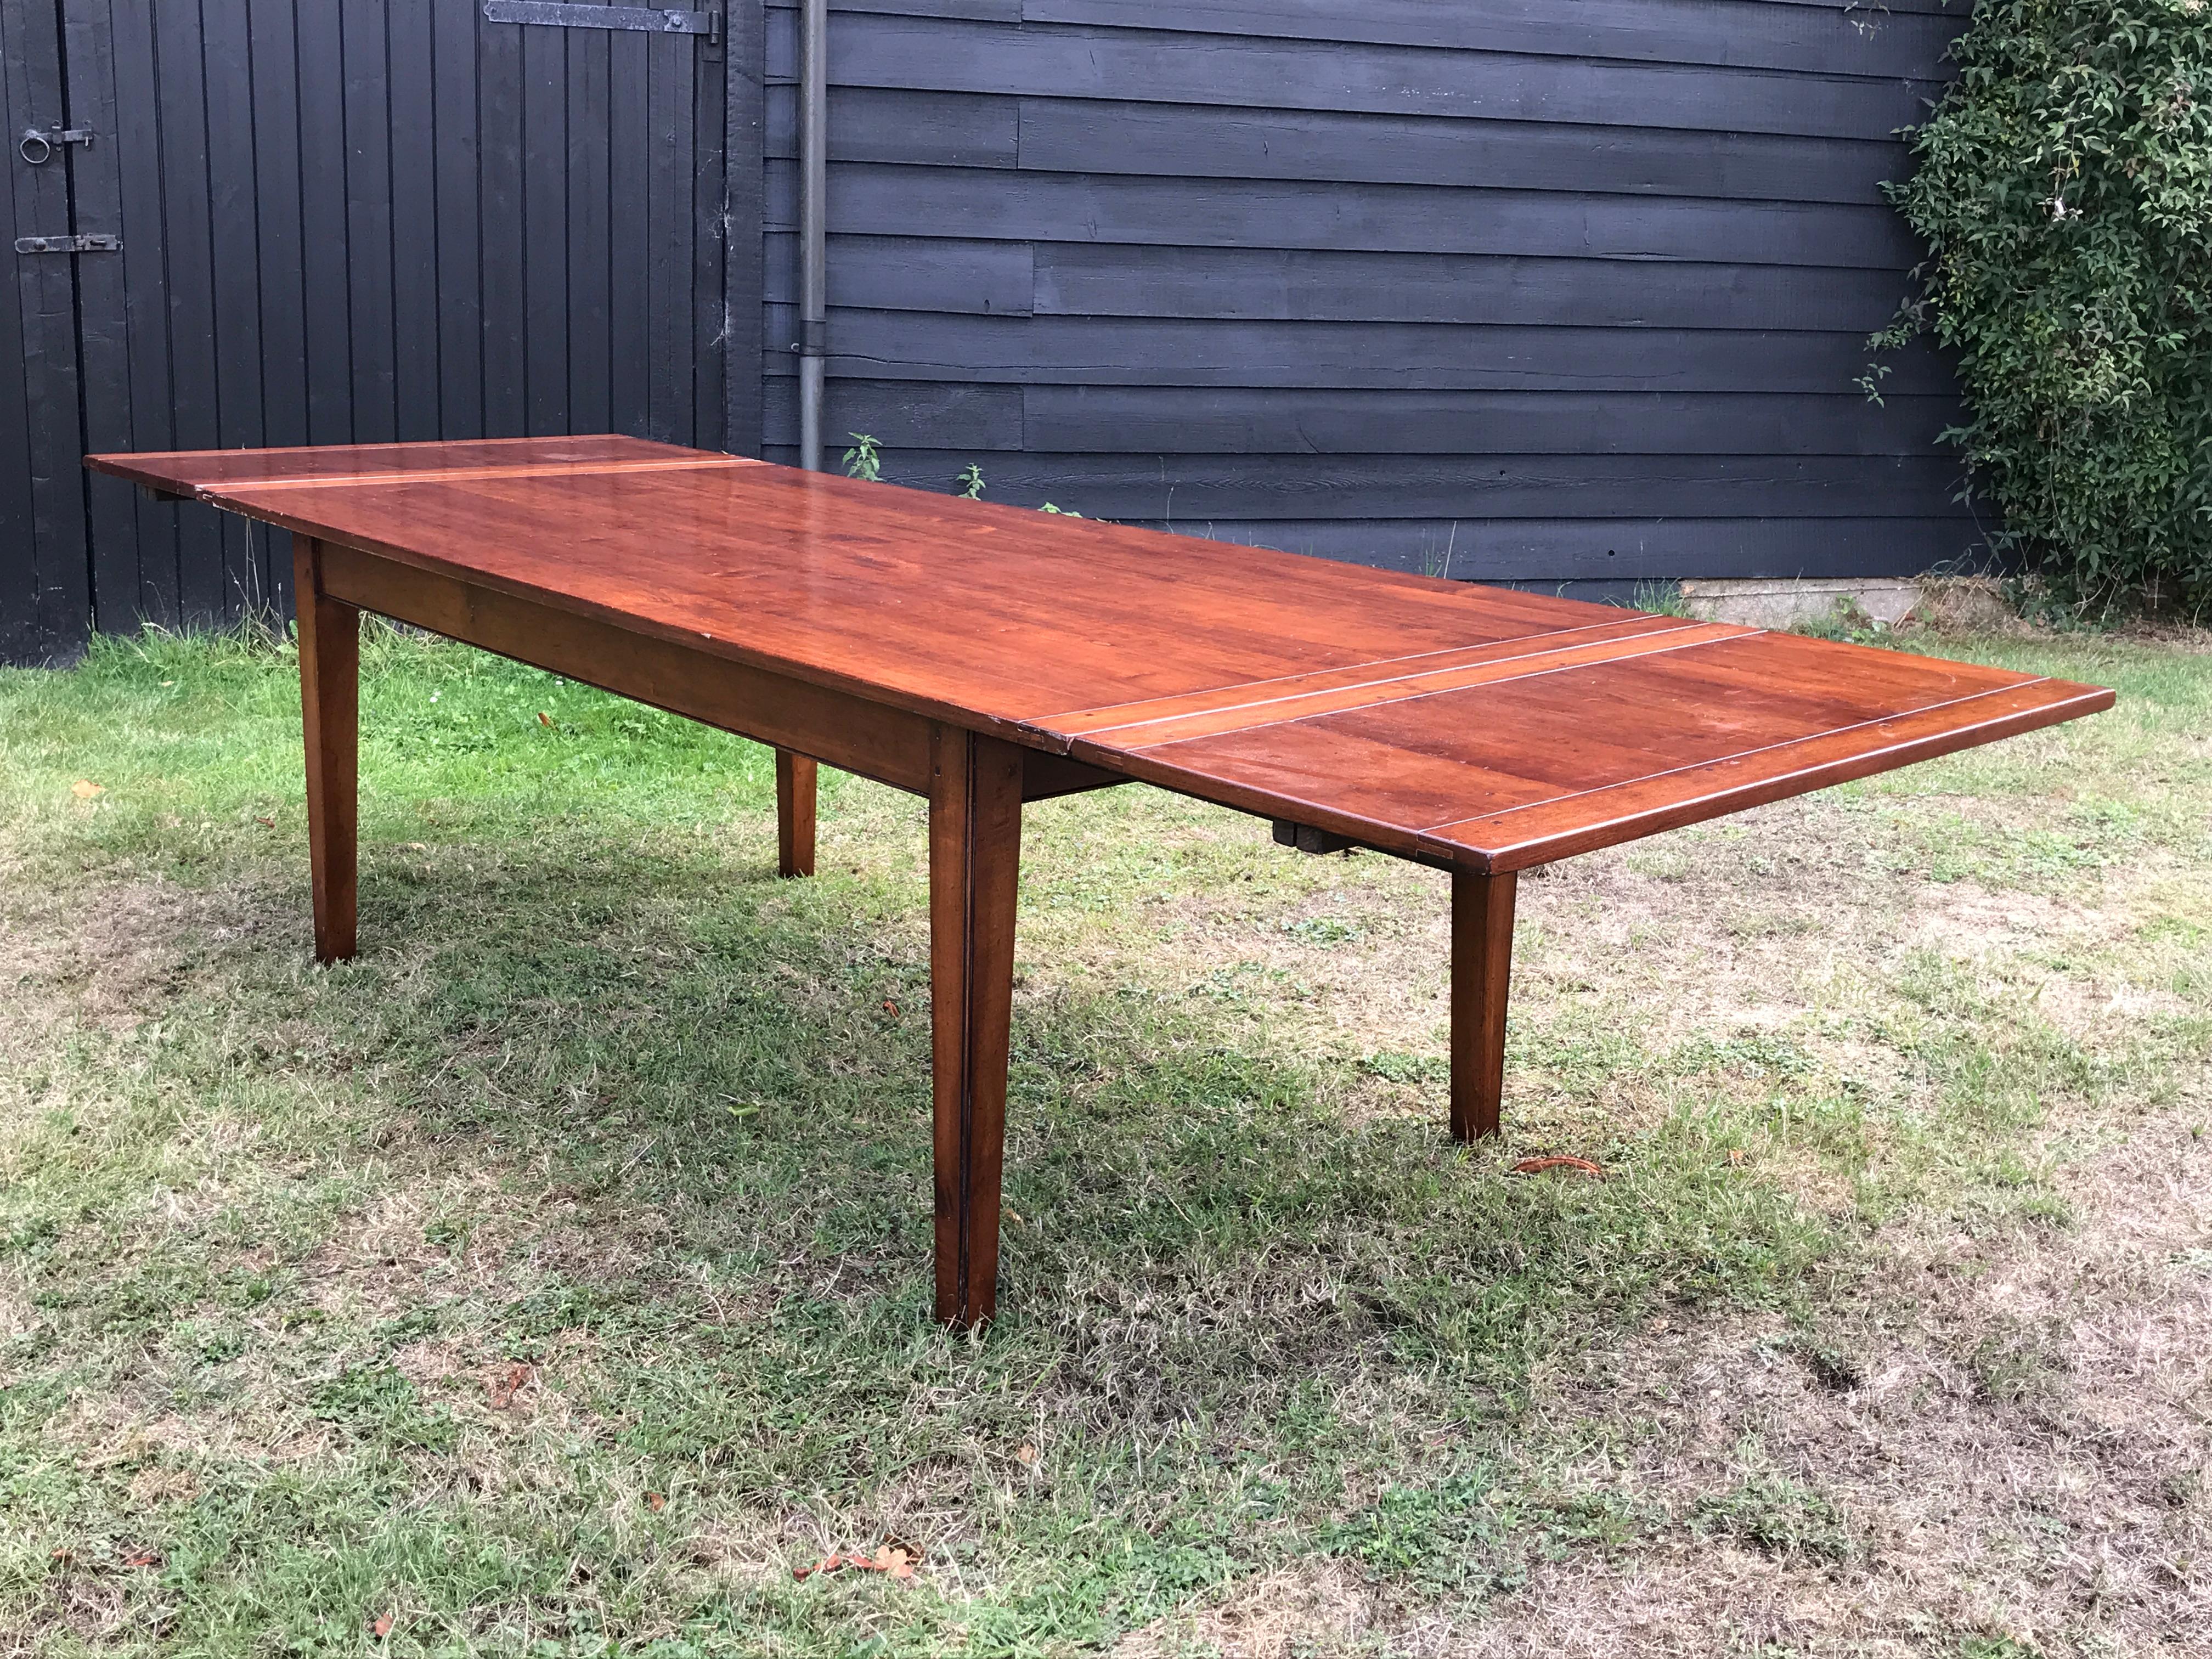 - Cherrywood is much prized for its rich colour and beautiful figuring. The trees grow to a small size so it is unusual to find a large piece made from this fruitwood
- The drawleaf is a practical model and this table can be used as a desk, for